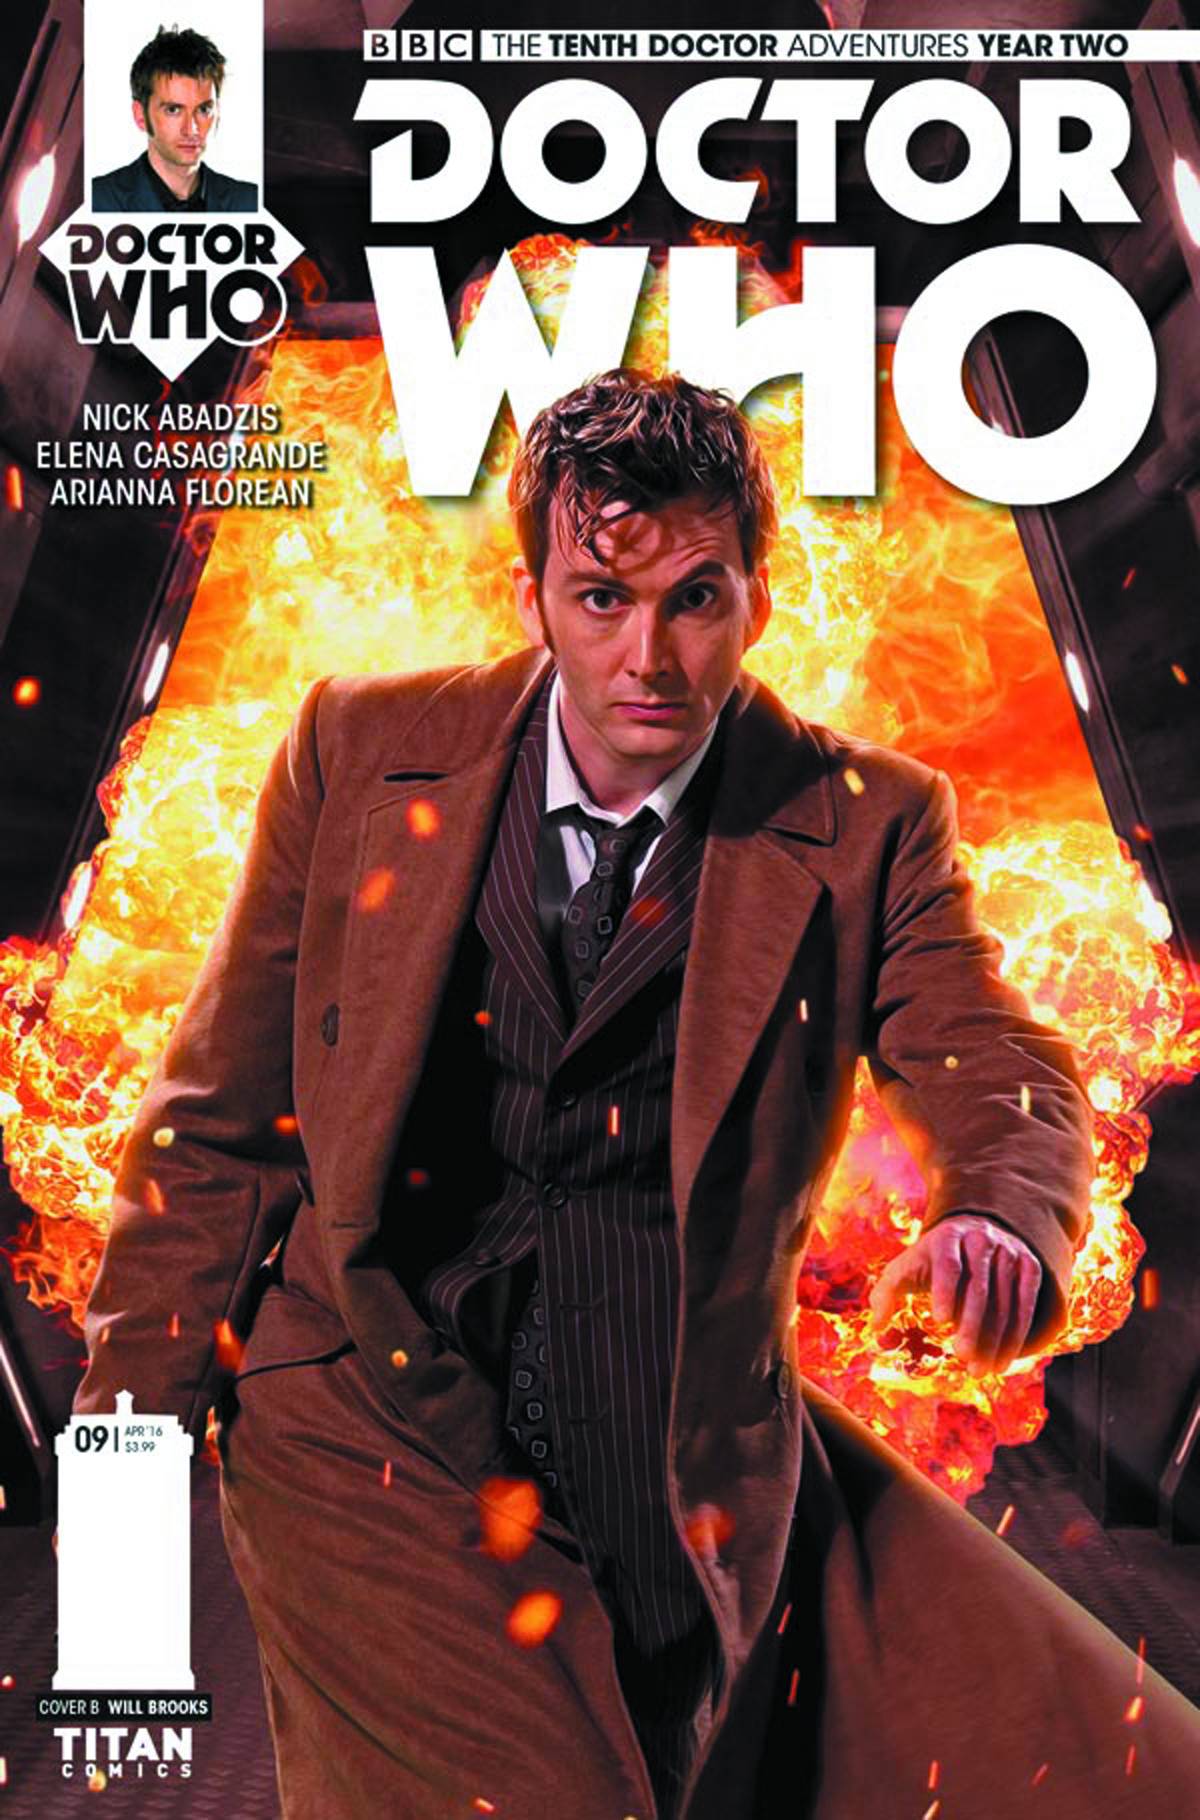 Doctor Who 10th Year Two #9 Cover B Photo